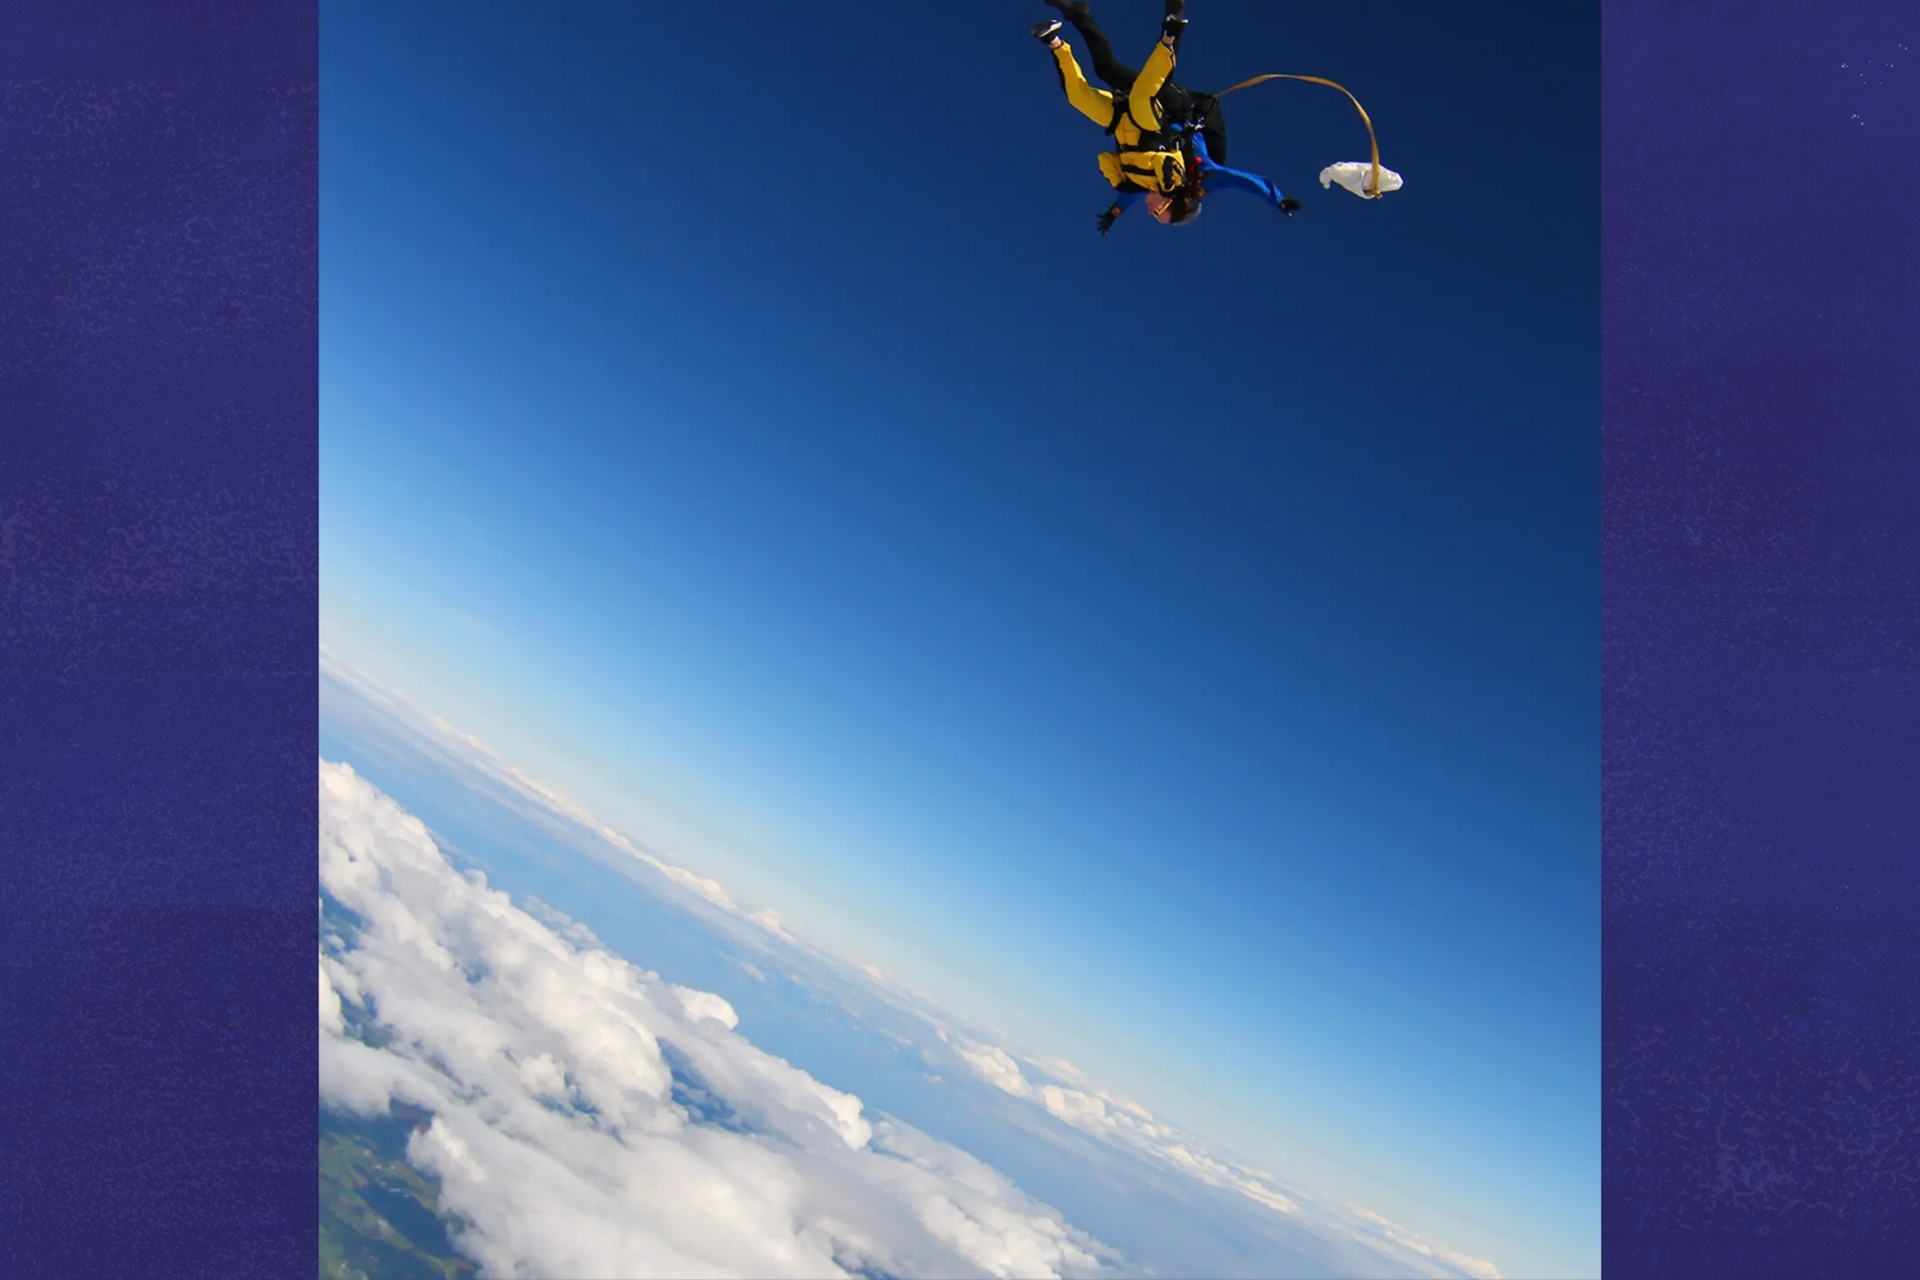 Our fundraiser Laura skydiving above the clouds.